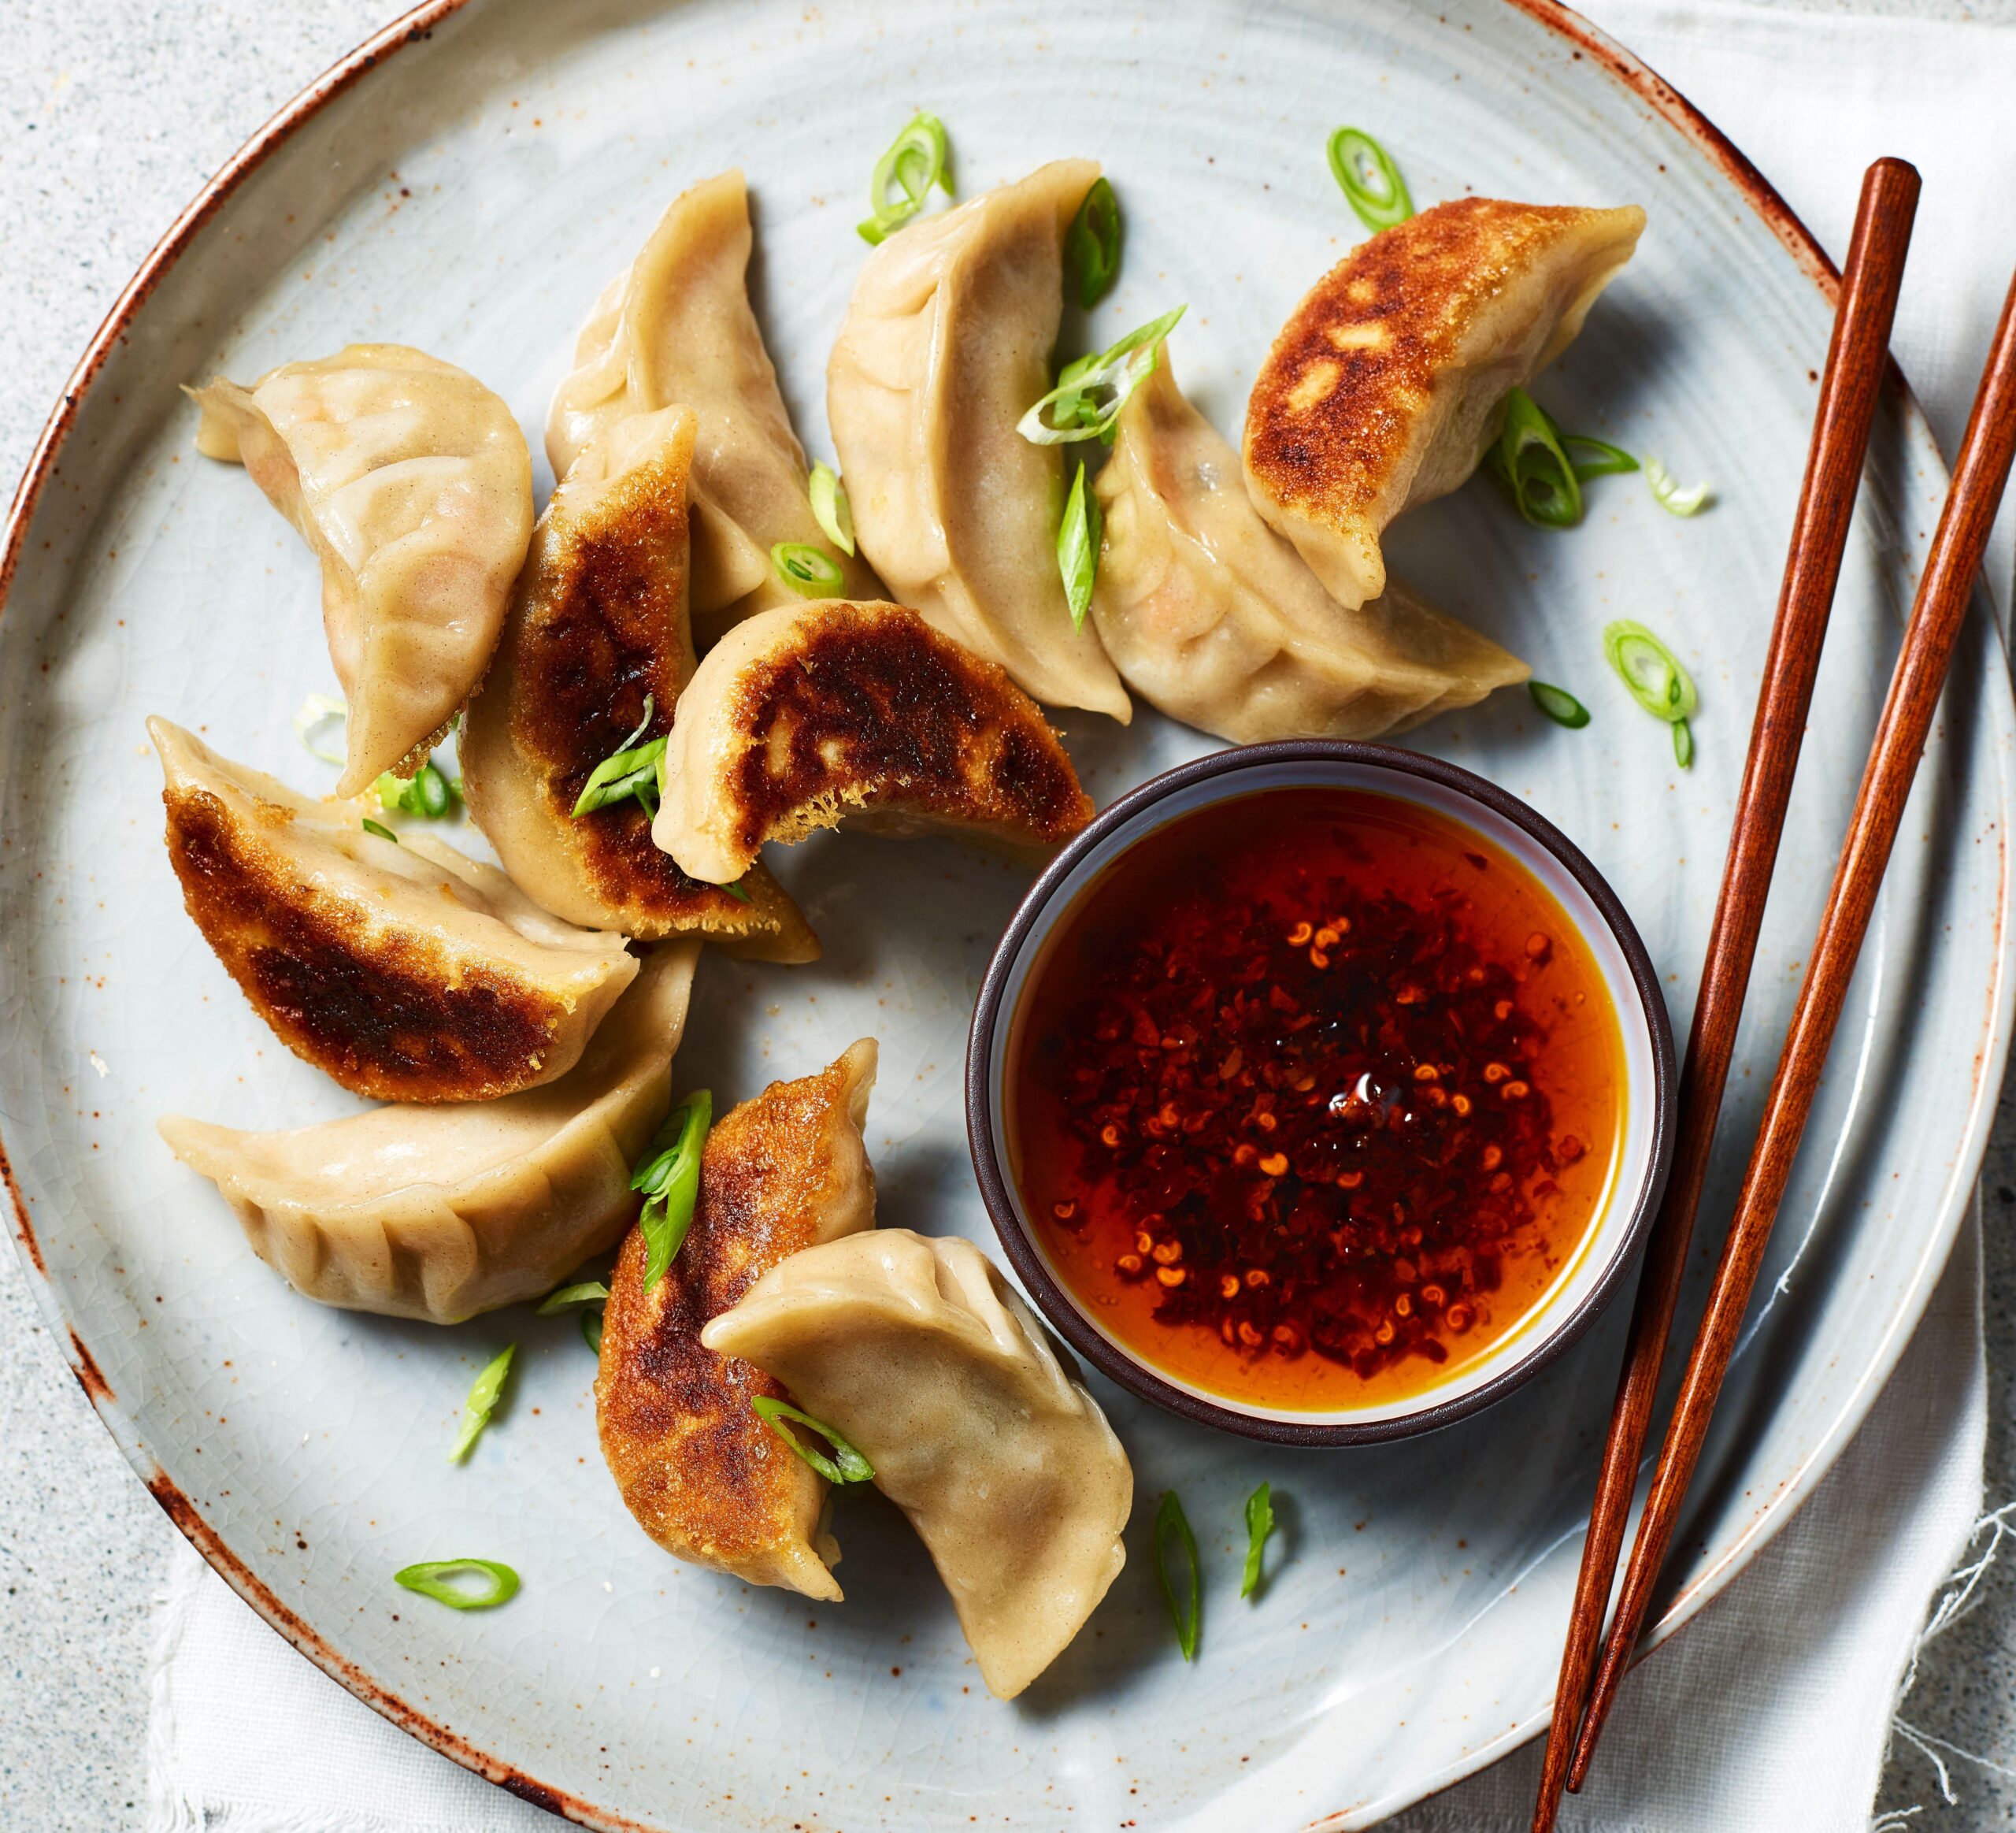  Gyoza without meat? Yes please! You won't believe how tasty these little guys are.